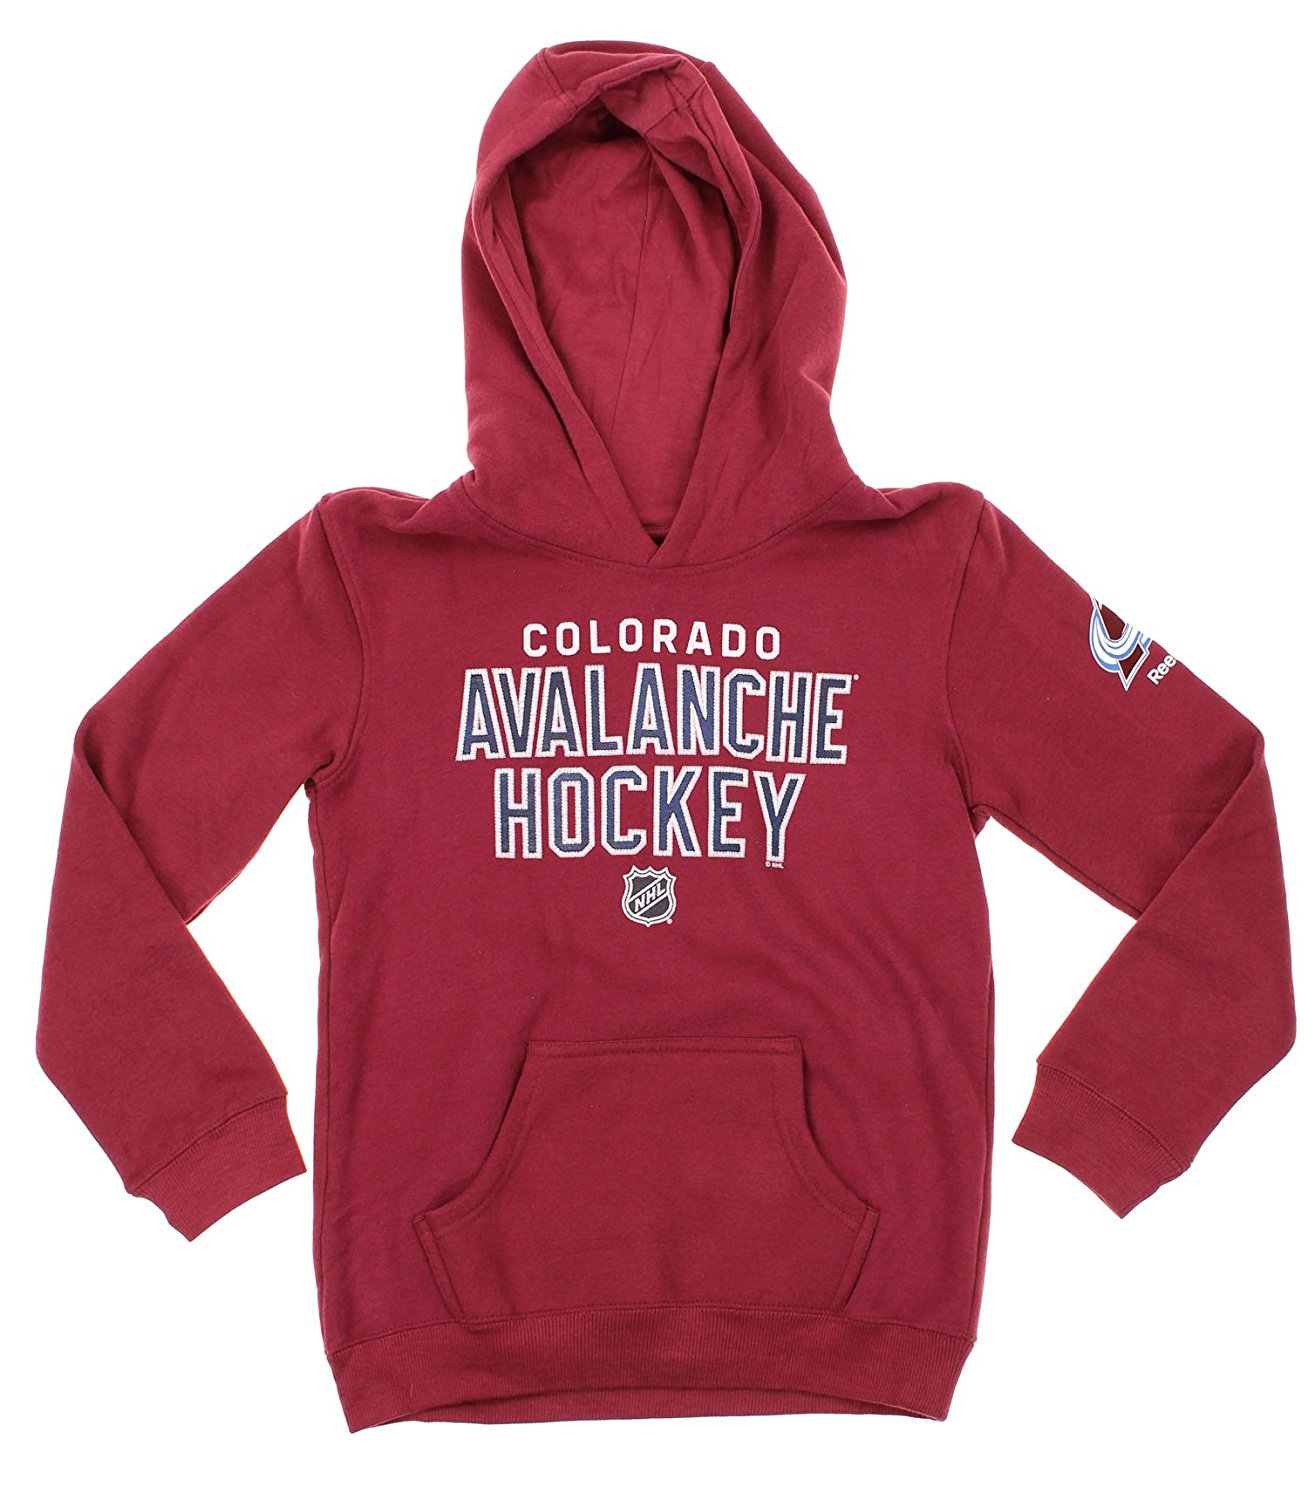 Youth NHL Reebok Colorado Avalanche Hockey Official Licensed